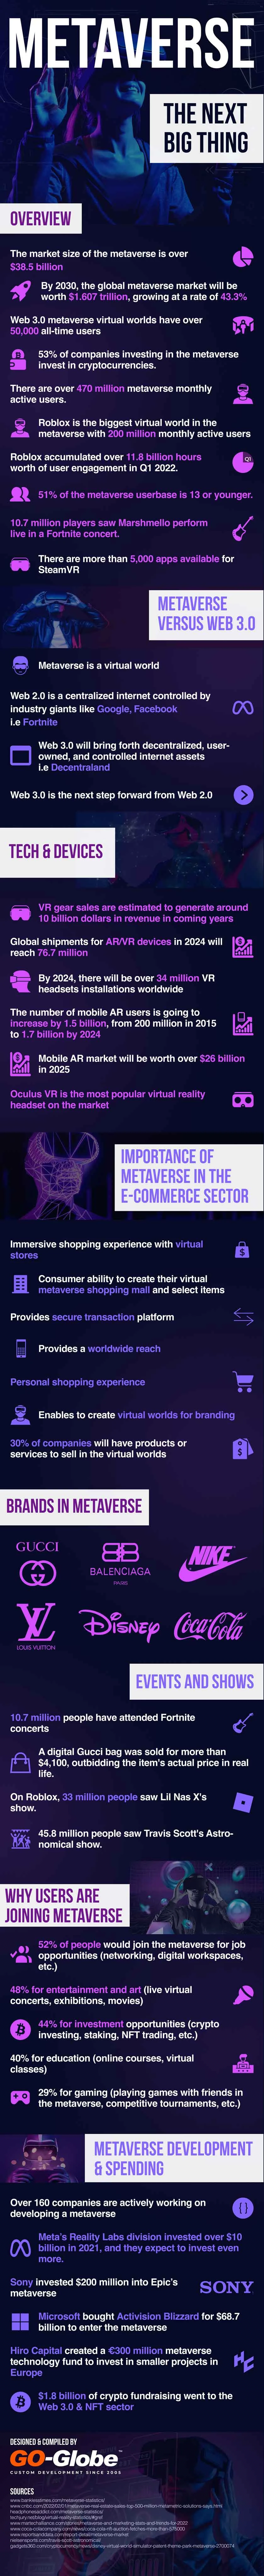 Facebook is investing millions into a user-created metaverse, but it's not  here yet - CNET